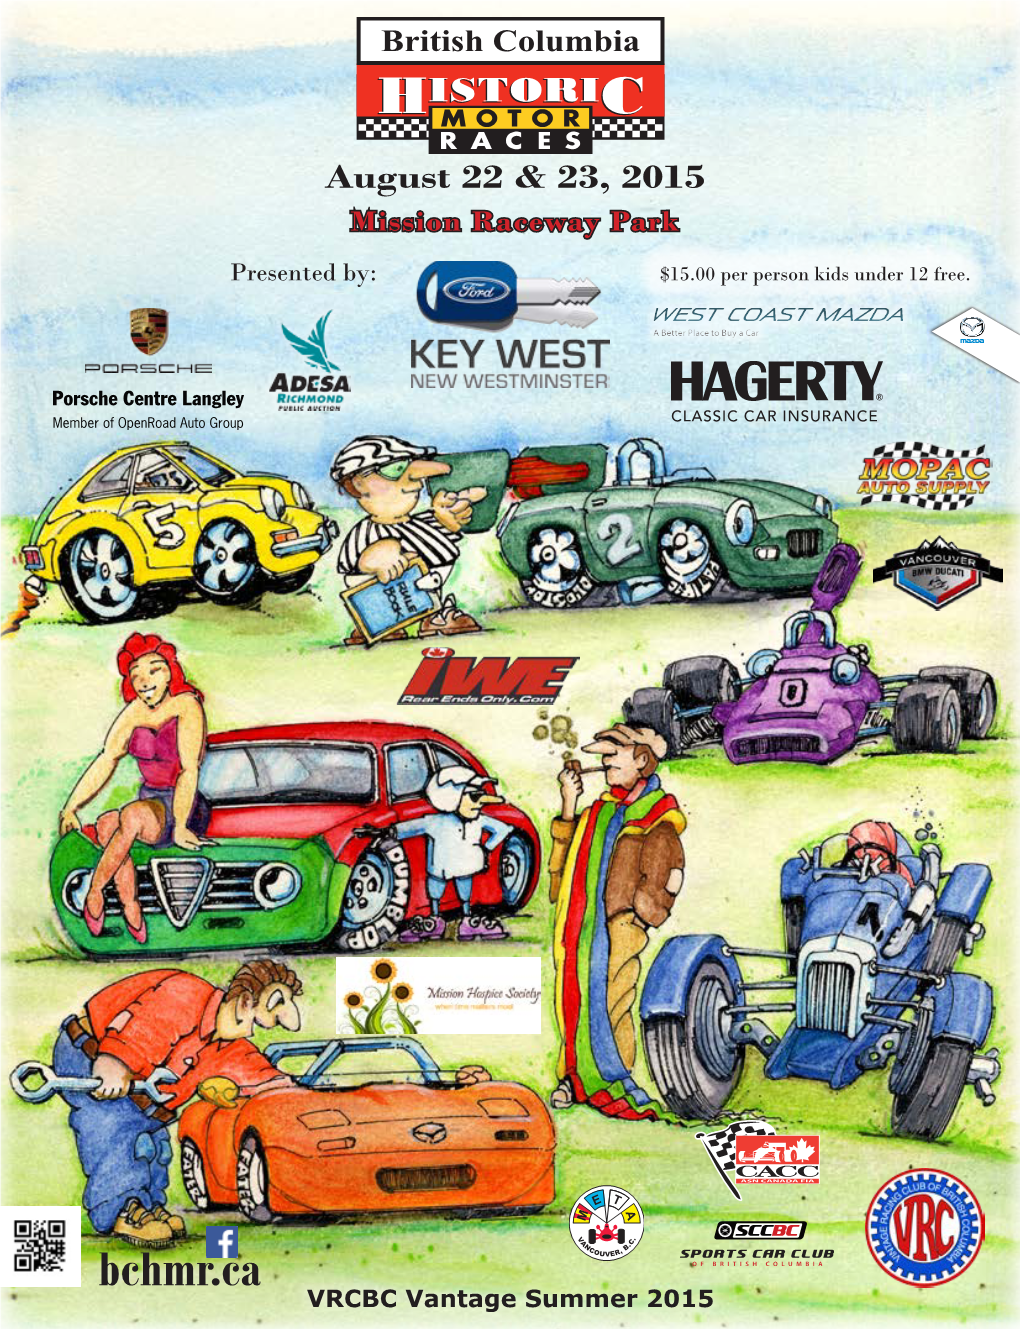 What Is a Vintage Car? Join Vrcbc and Race Mg